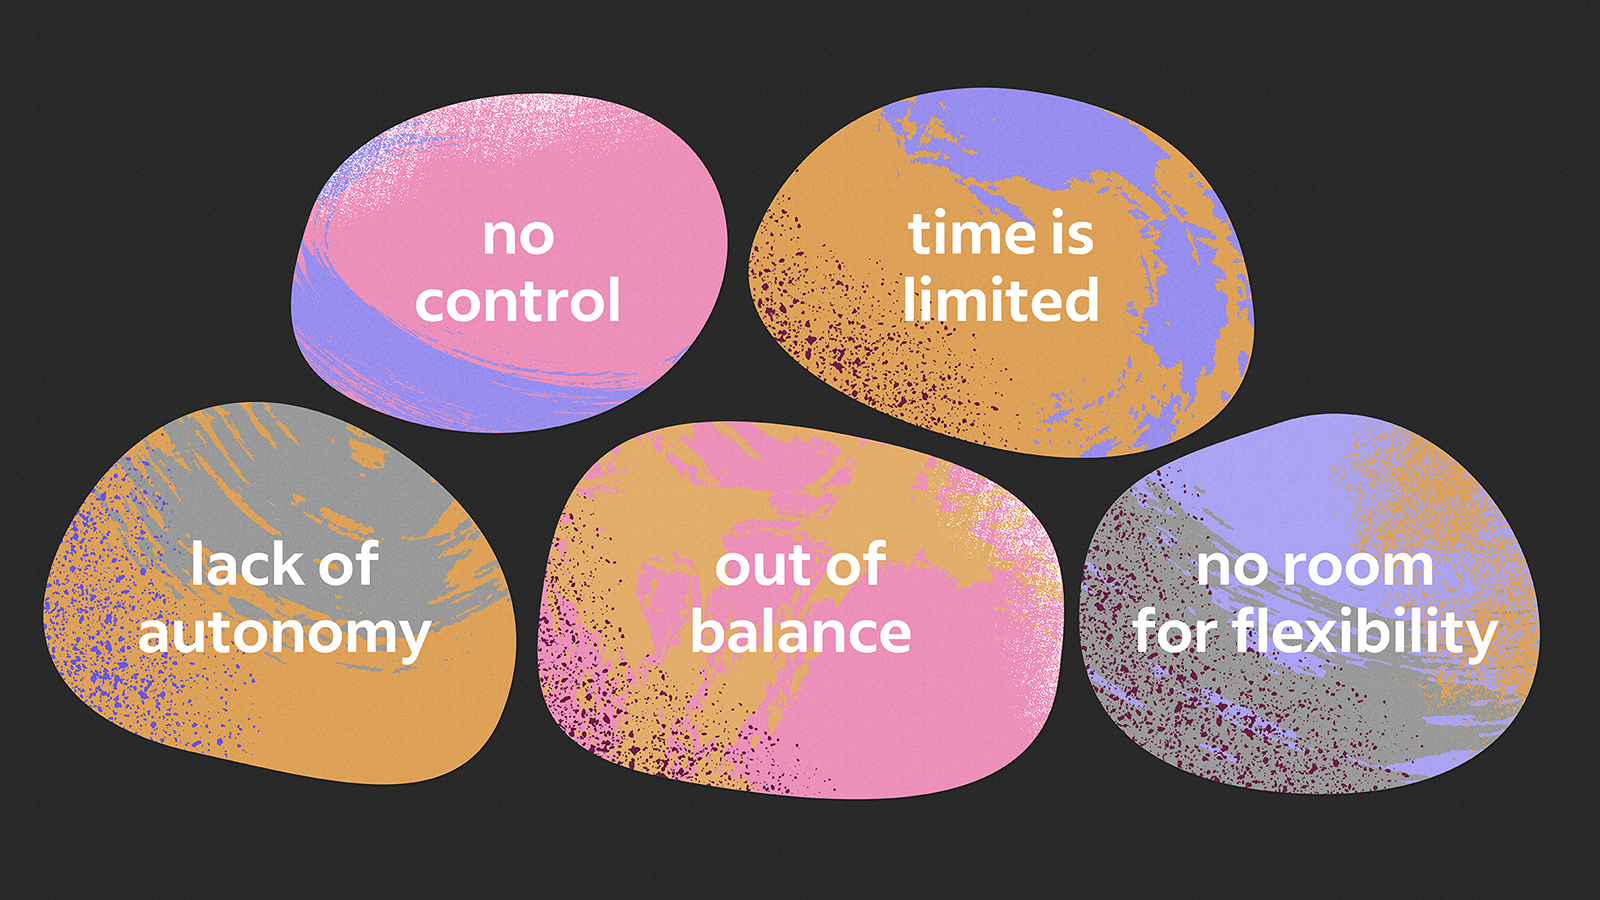 Five pebble shapes display categories that read: "no control," "time is limited," "lack of autonomy," "out of balance," and "no room for flexibility."